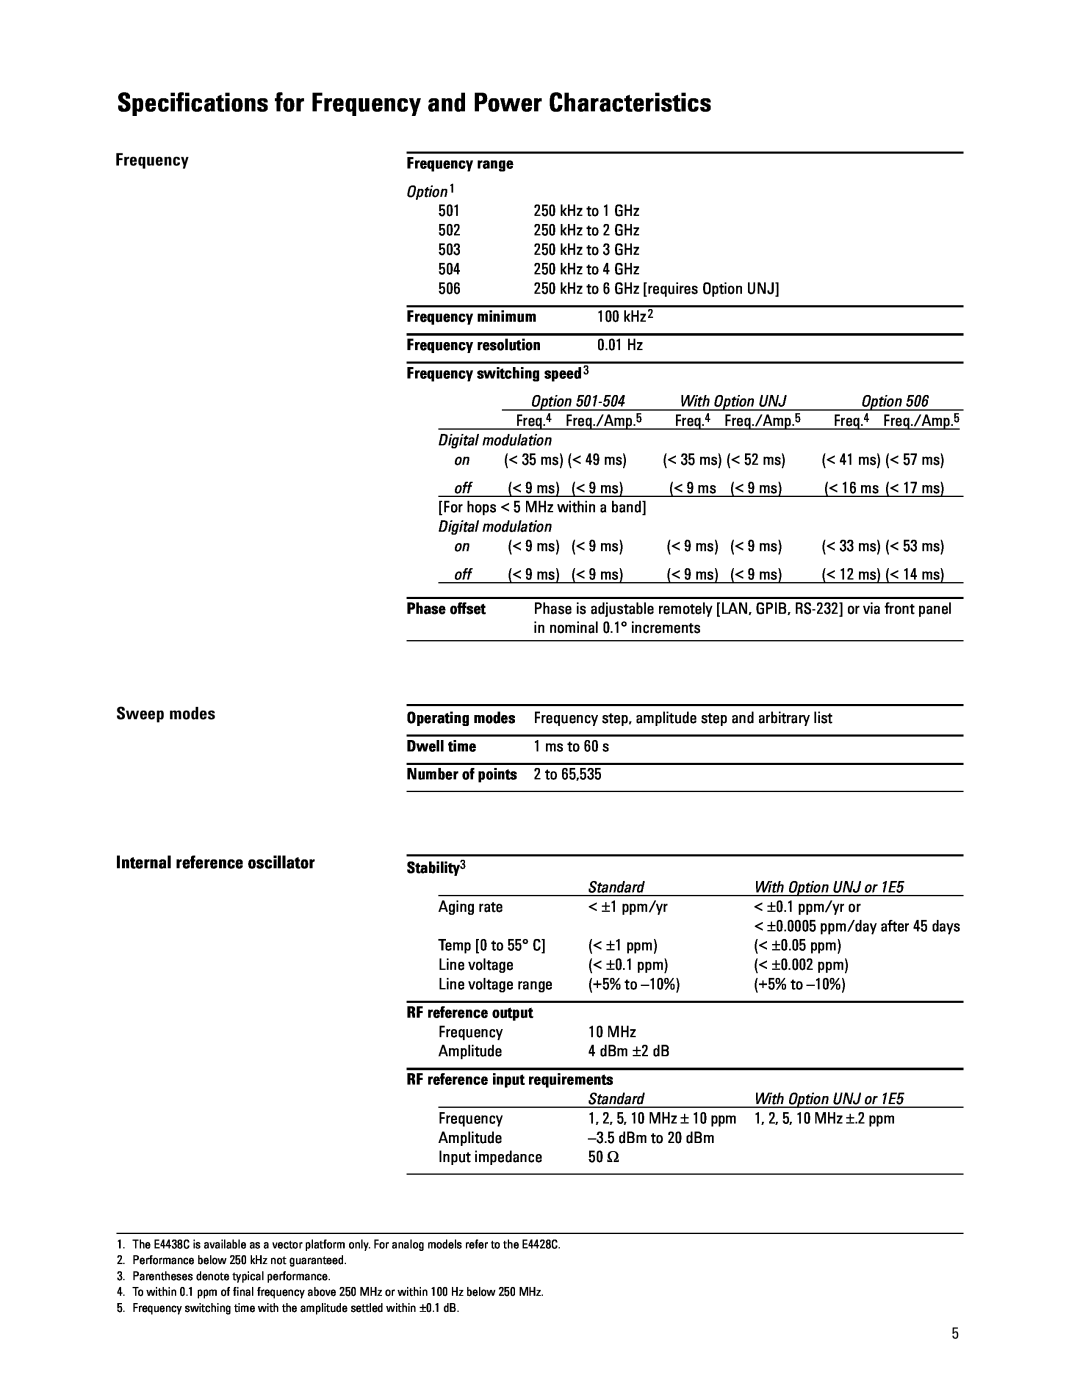 Agilent Technologies E4438C manual Specifications for Frequency and Power Characteristics, RF reference input requirements 